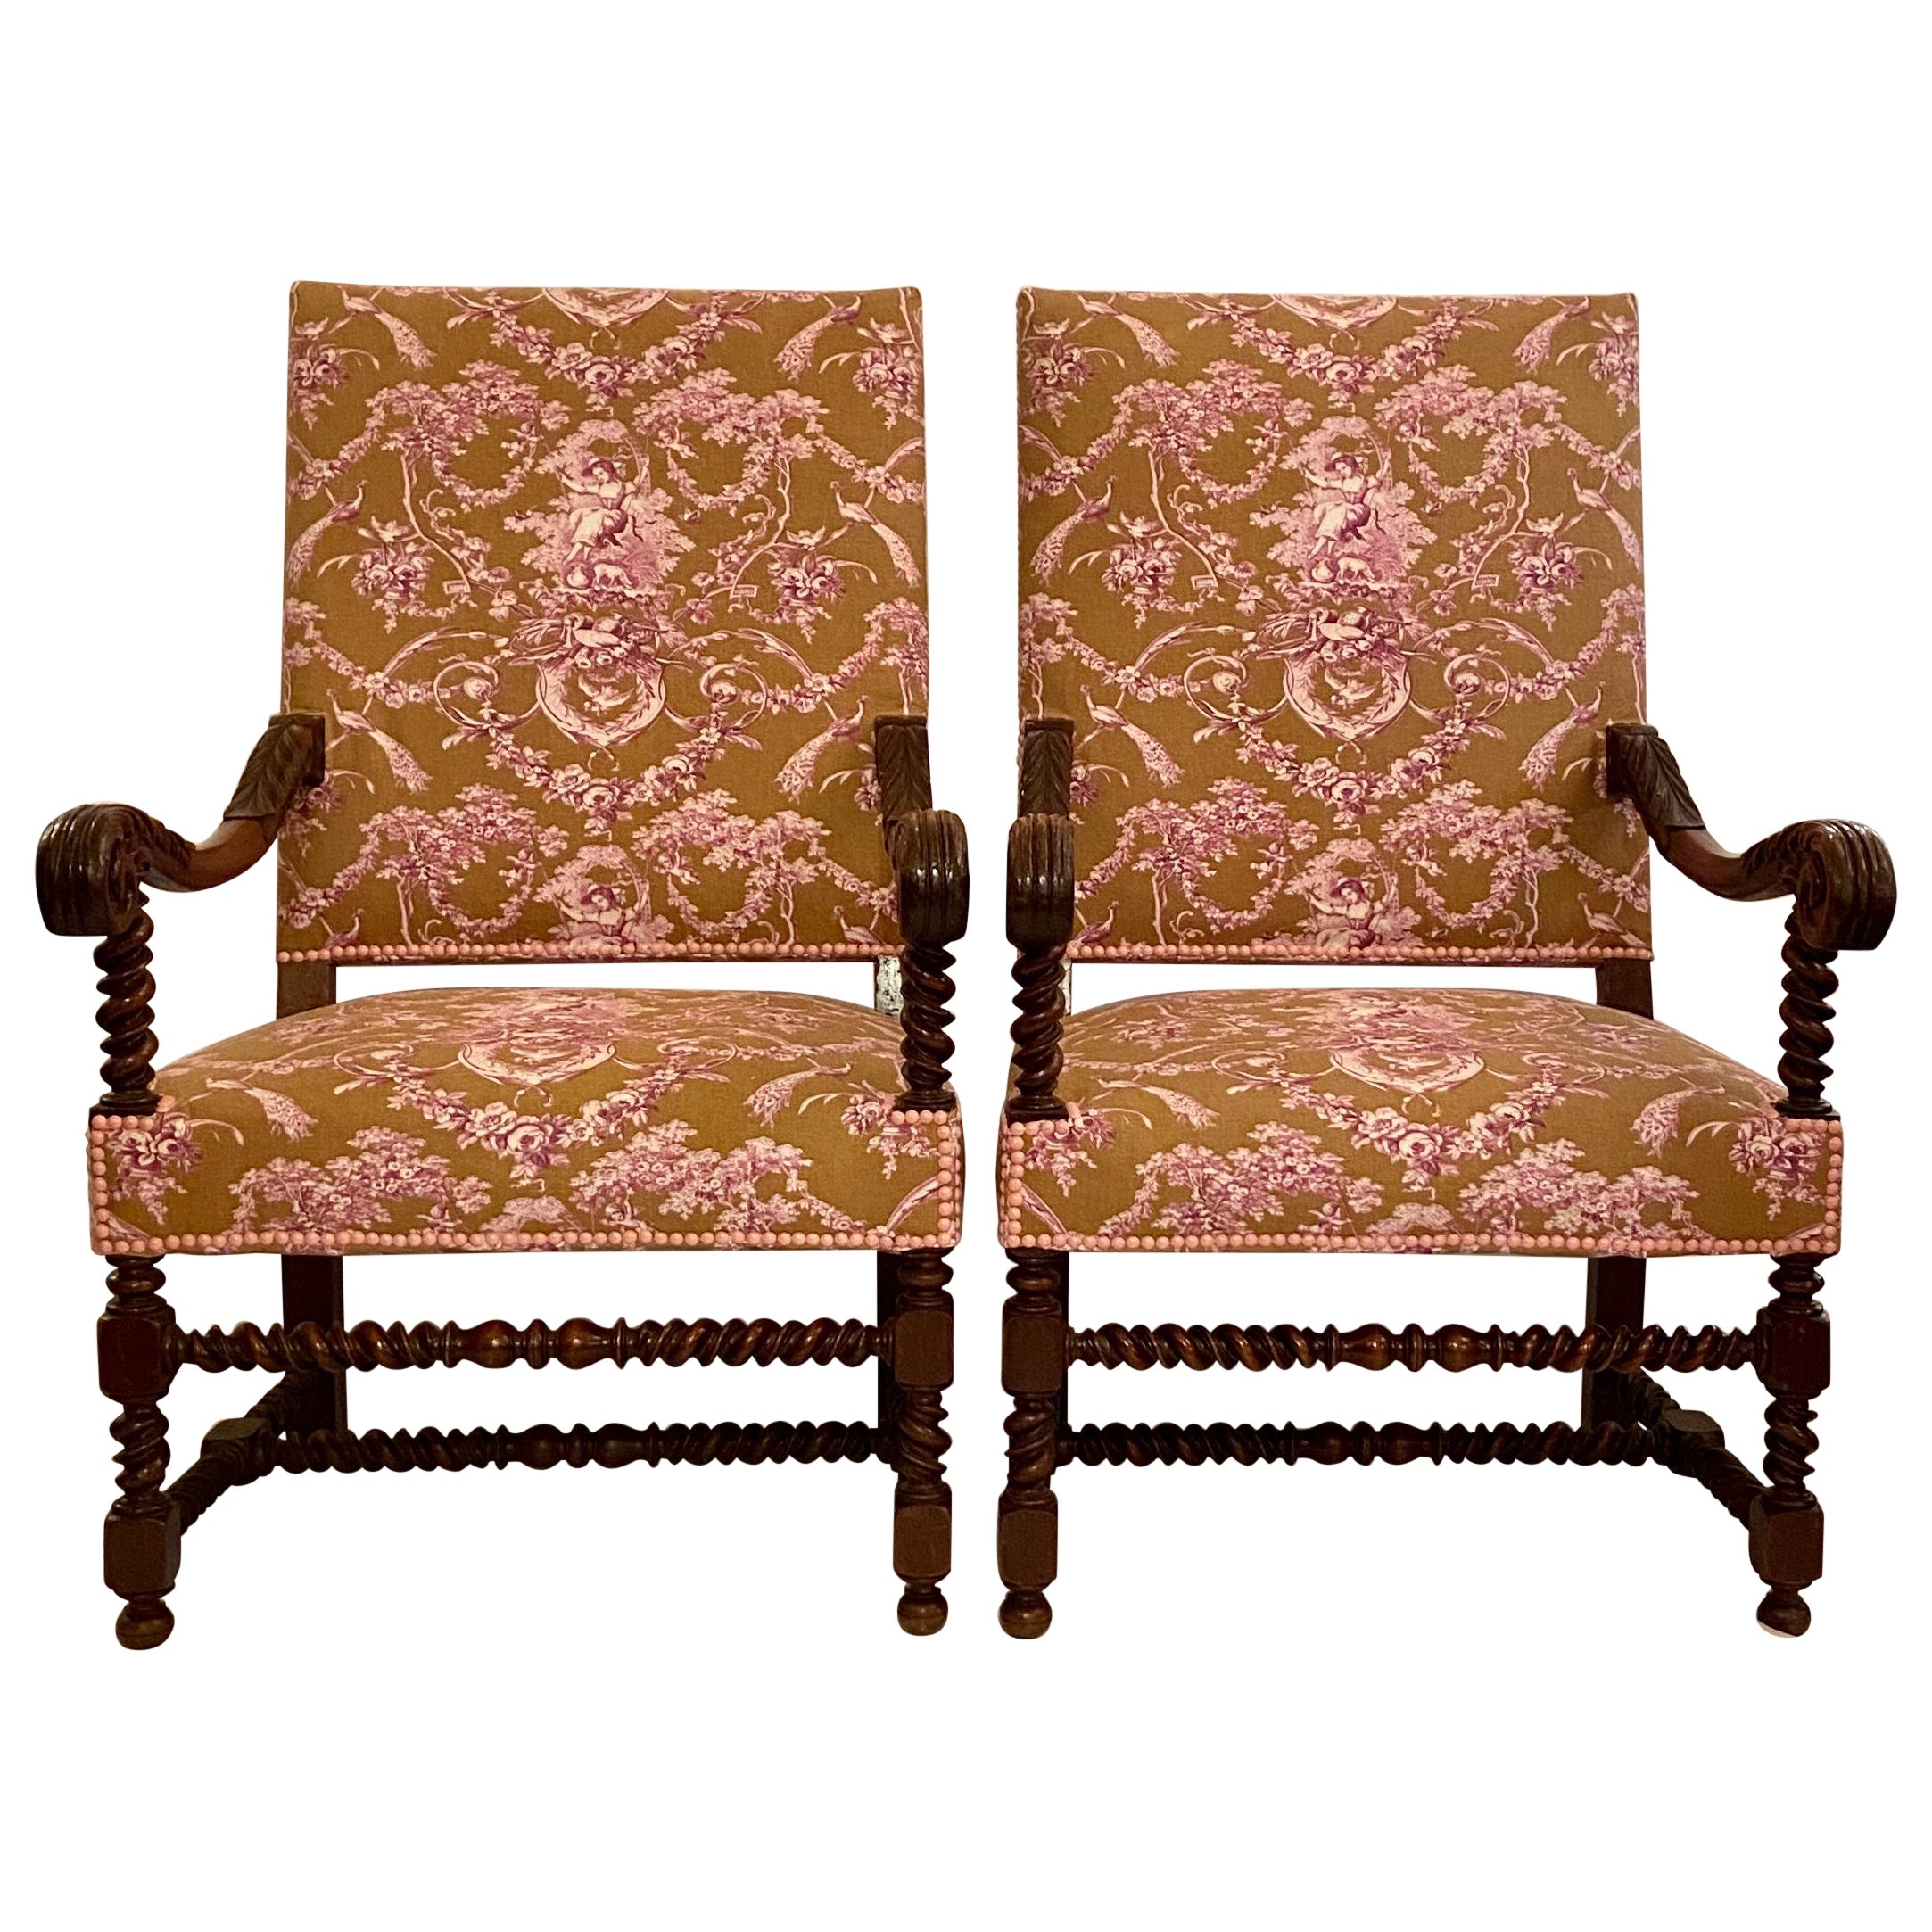 Pair Antique French Francois i Carved Walnut & Toile Armchairs, circa 1860 For Sale